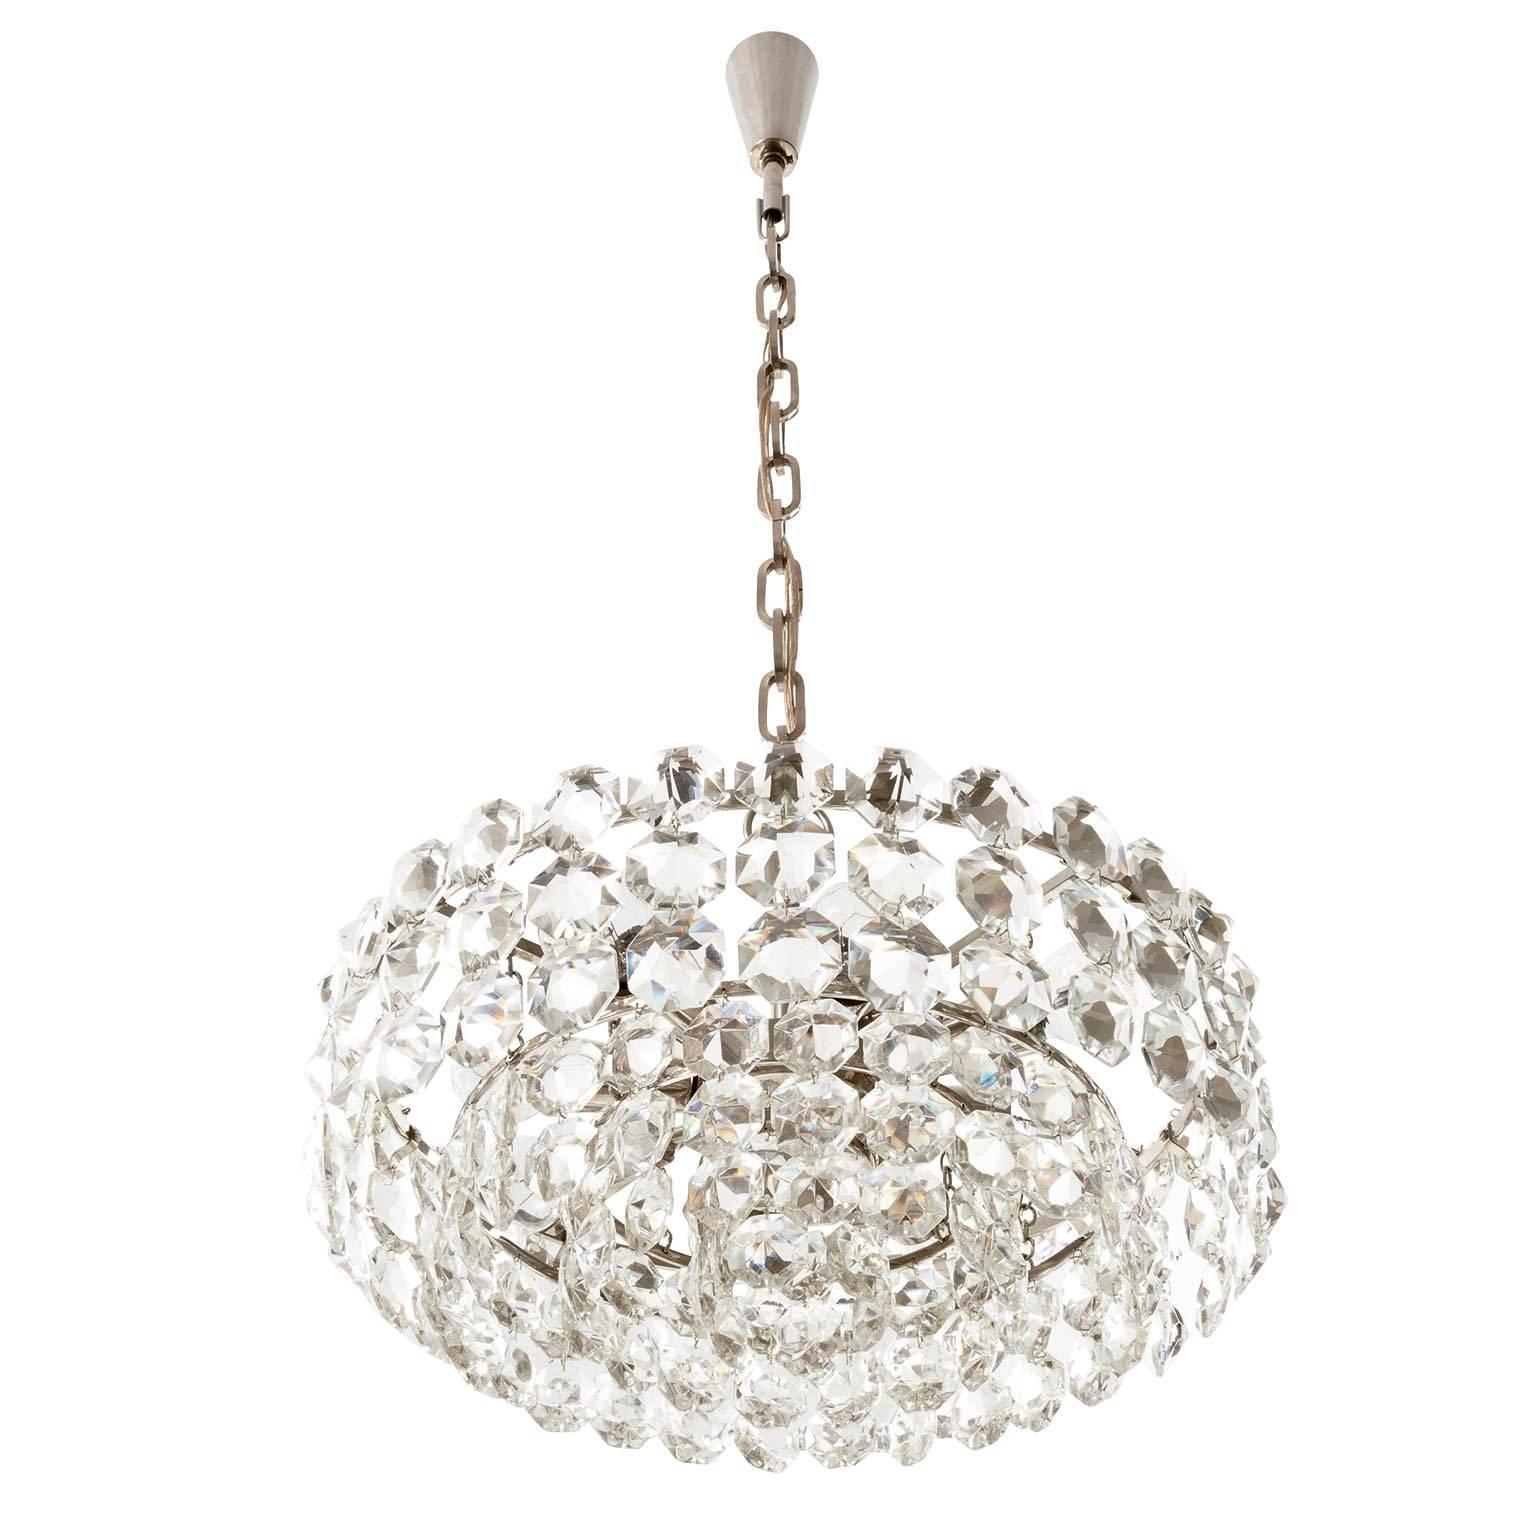 Austrian One of Two Bakalowits Chandeliers Pendant Lights, Nickel Glass, 1960s For Sale